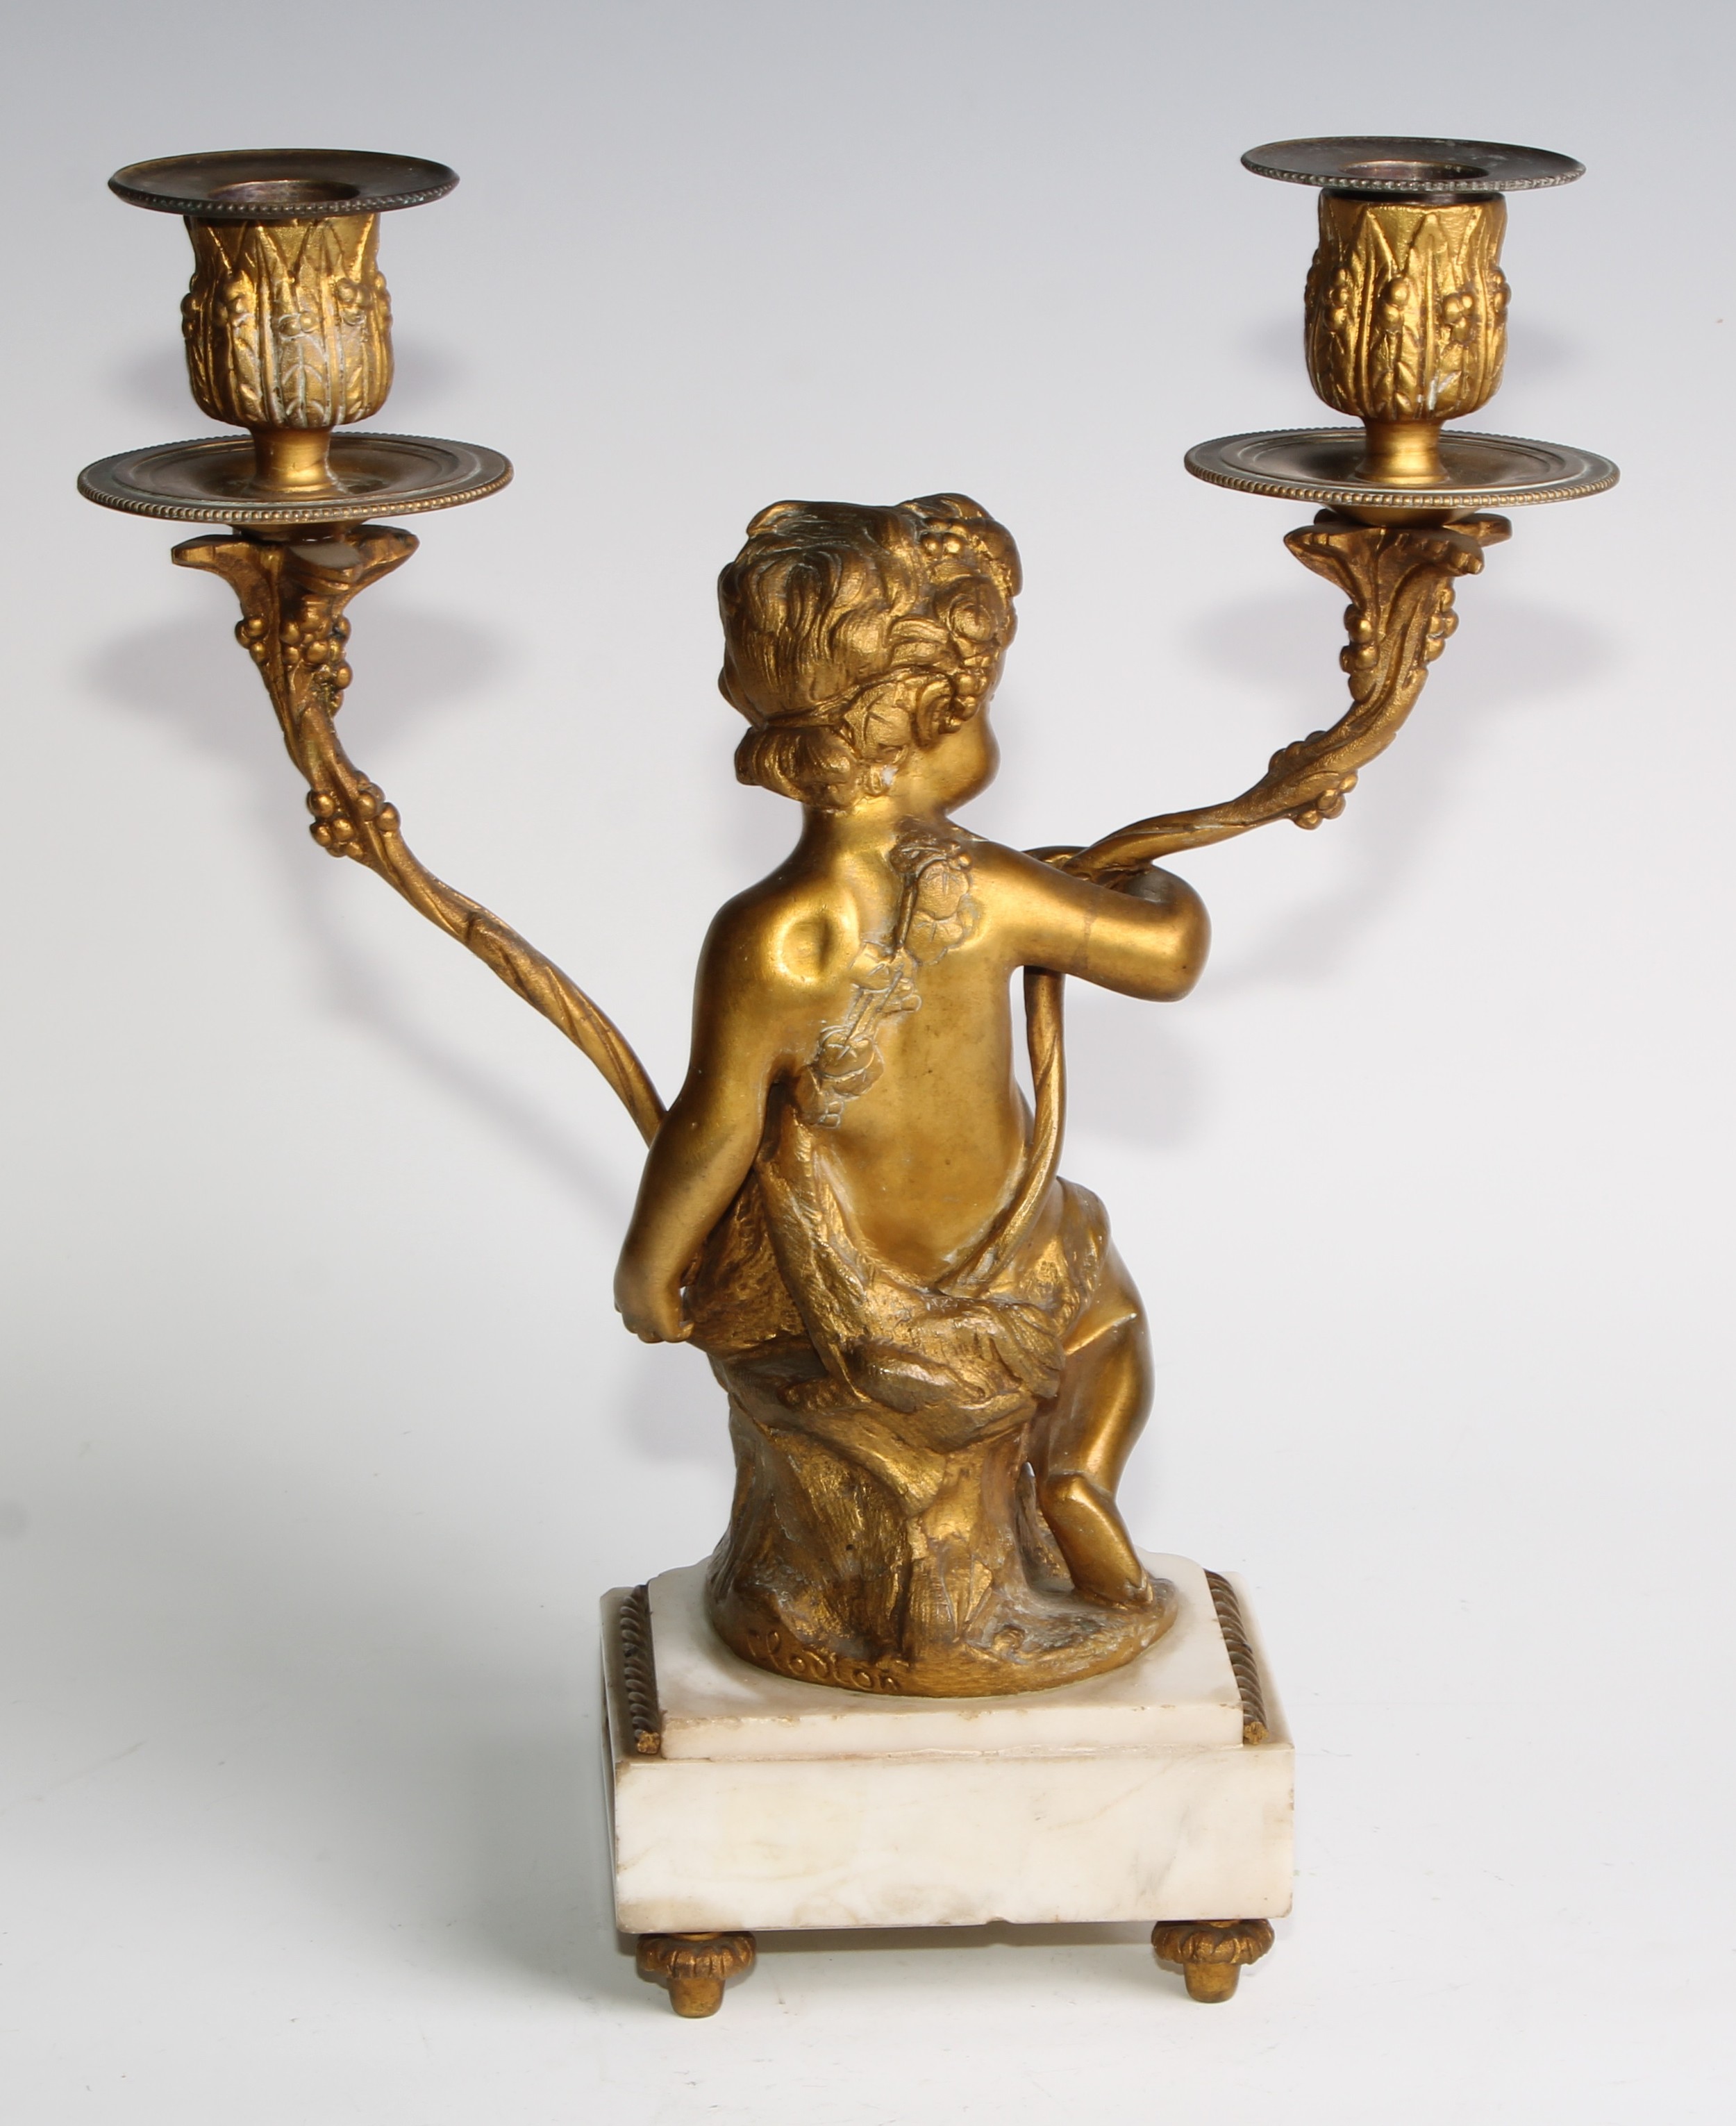 A pair of 19th century French bronze figural two-light candelabra, after Clodion (1738 - 1814), - Image 11 of 12